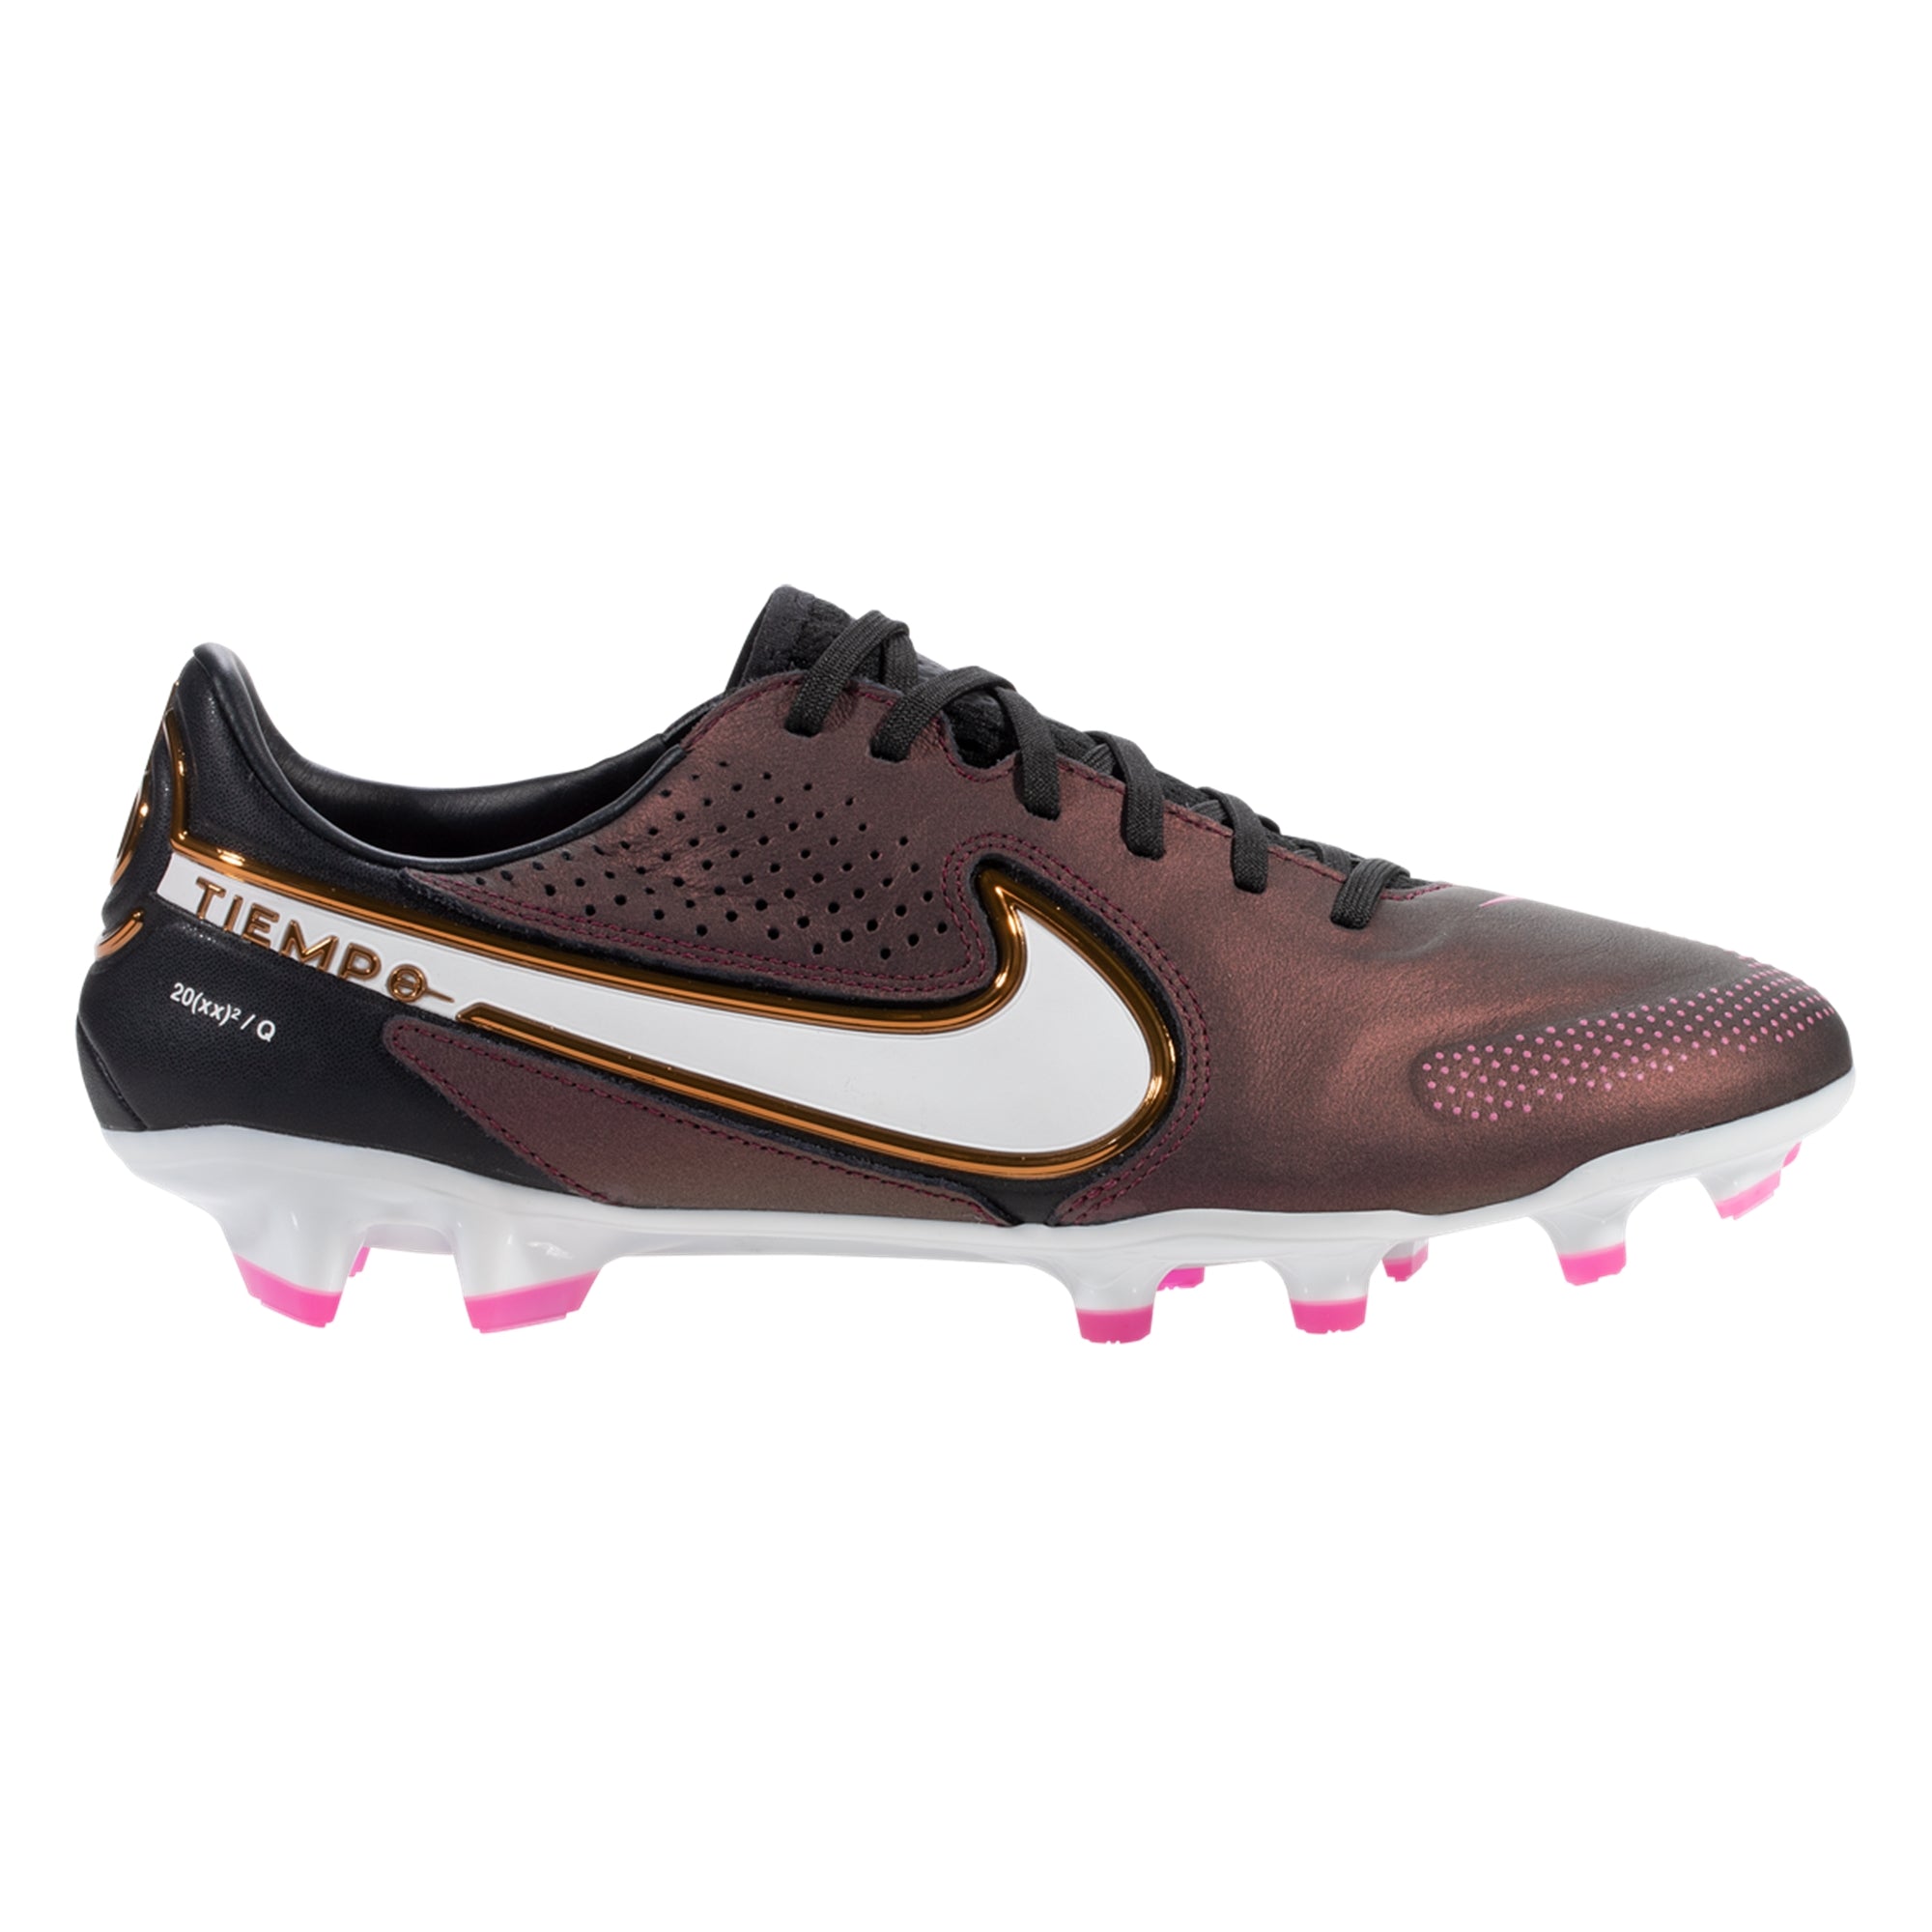 Nike Legend 9 Pro Q FG Firm Ground Soccer Cleats - Space Purple/White DR5979-510 Soccer USA